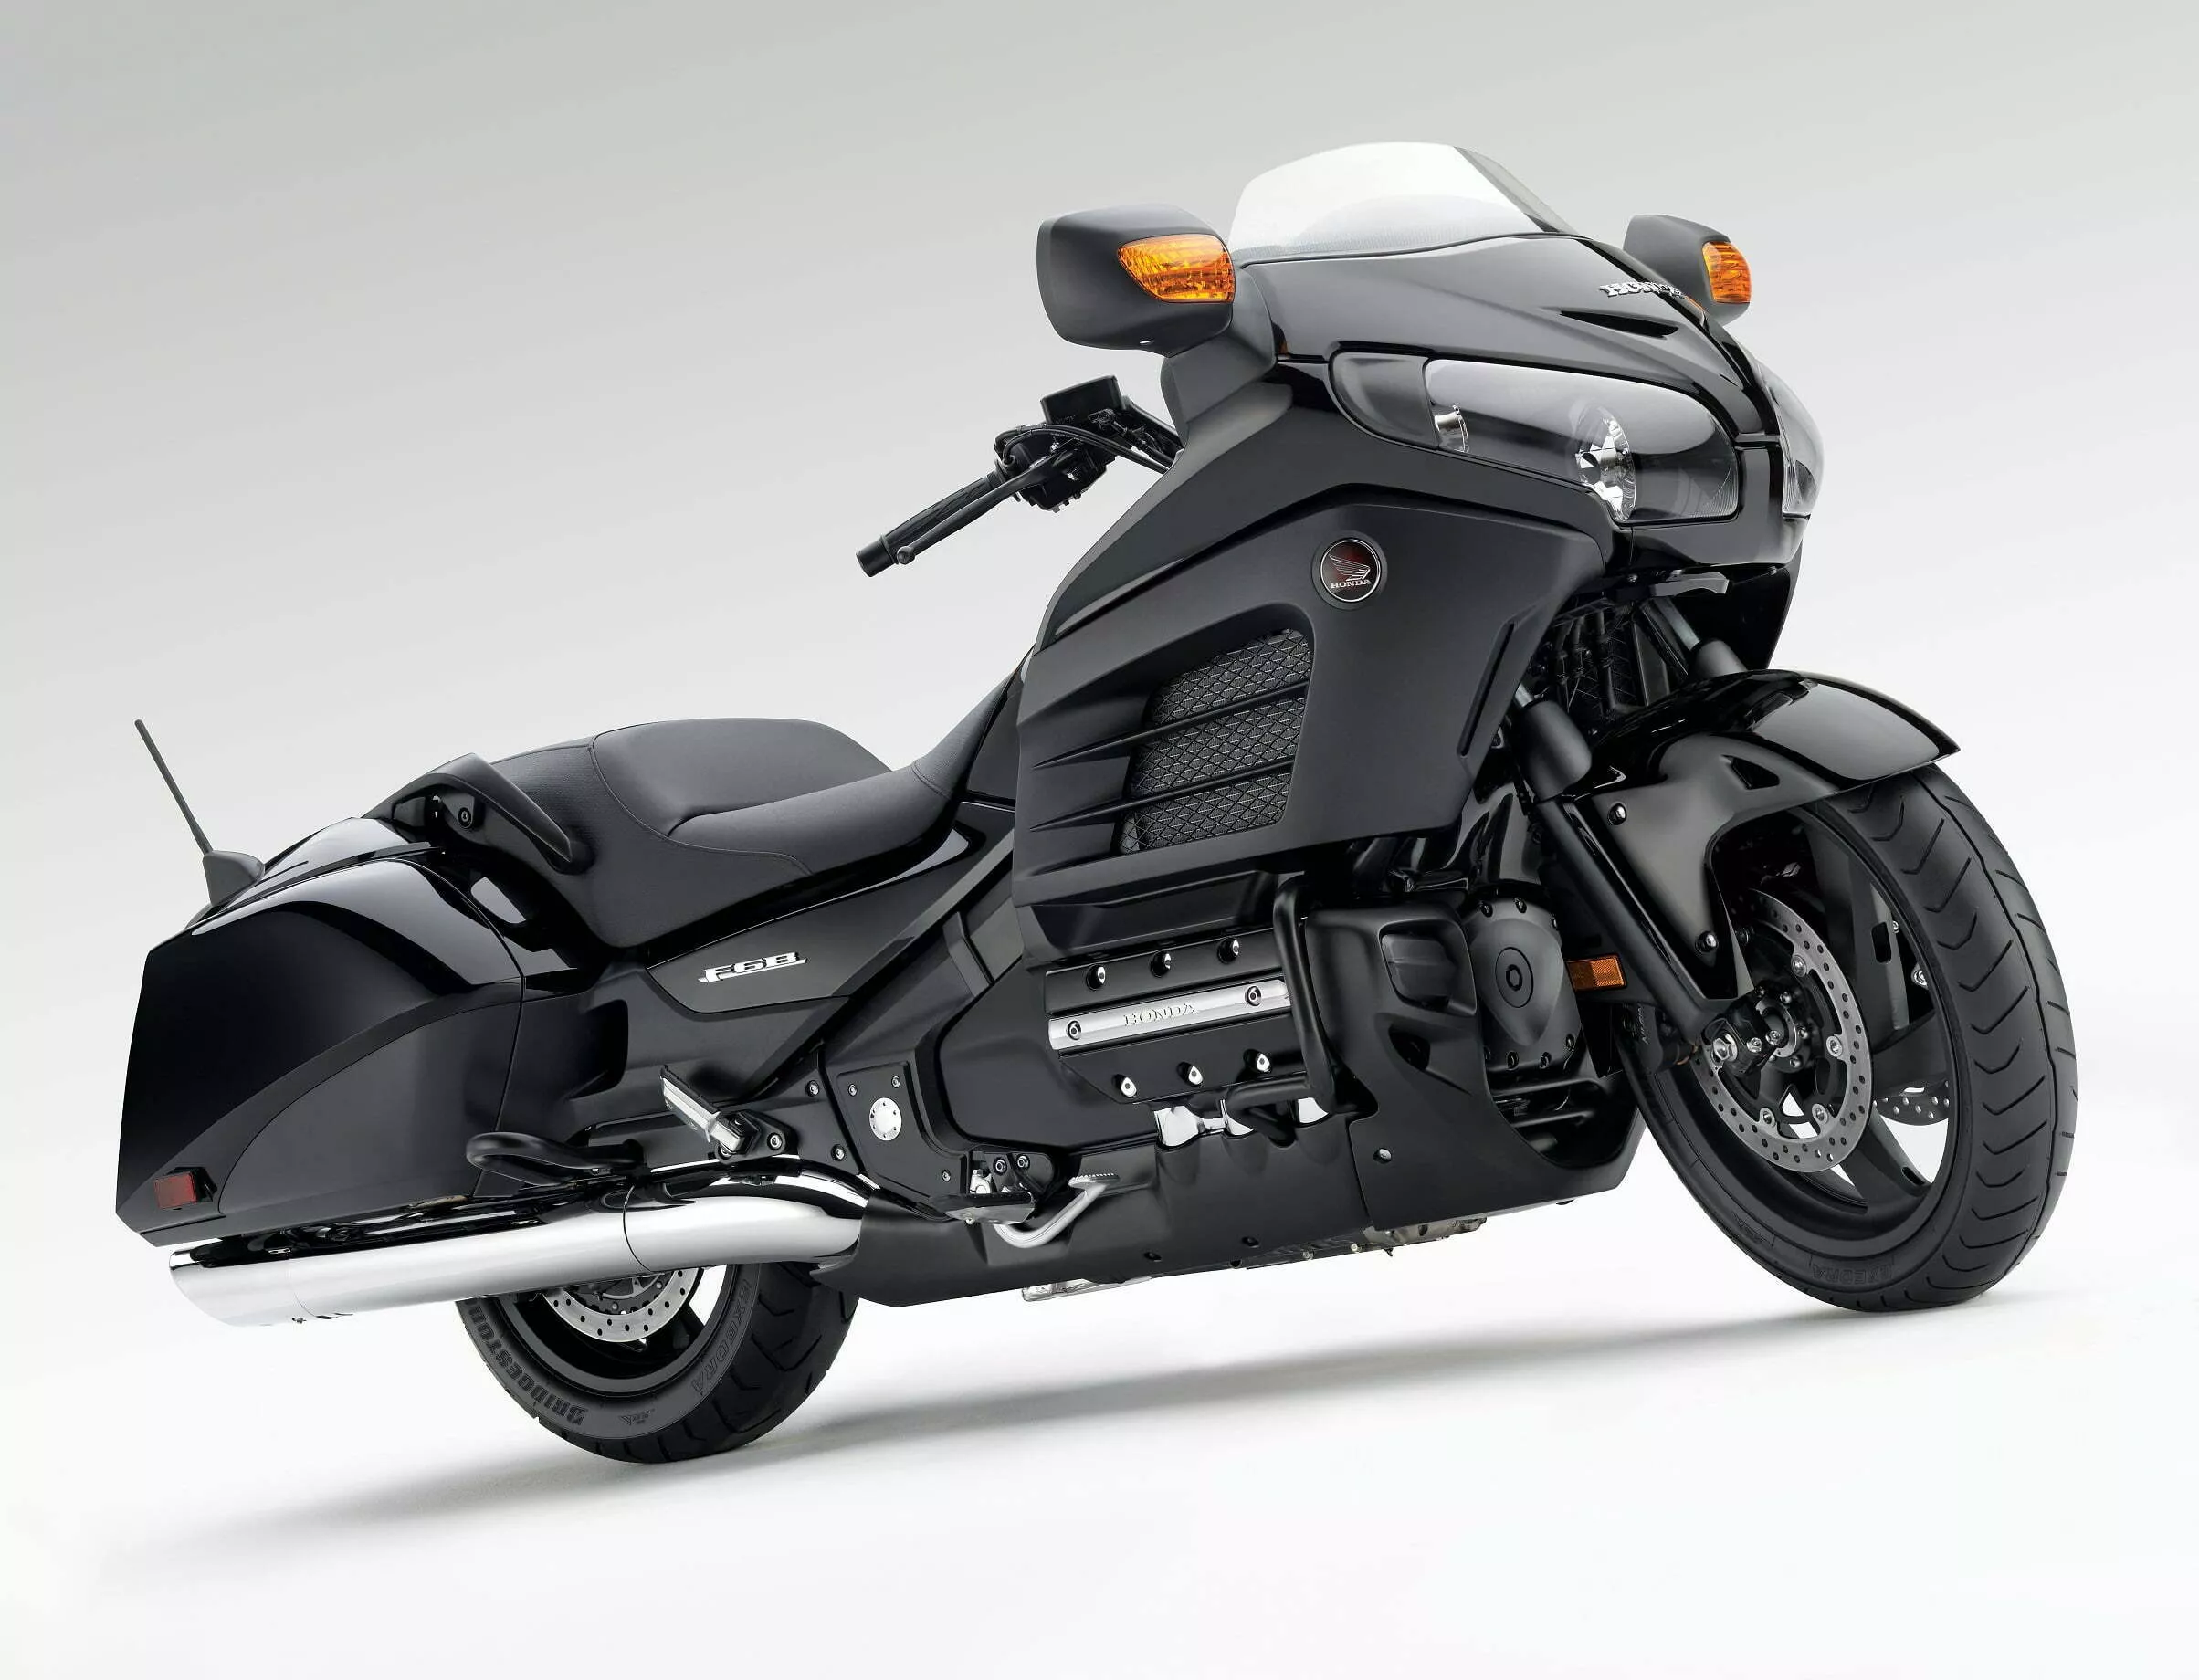 Honda made a few basic - but impactful - changes to the standard Gold Wing to create the F6B cruiser. Ironically, this is pretty close to what the base ‘Wing looks like in 2020.